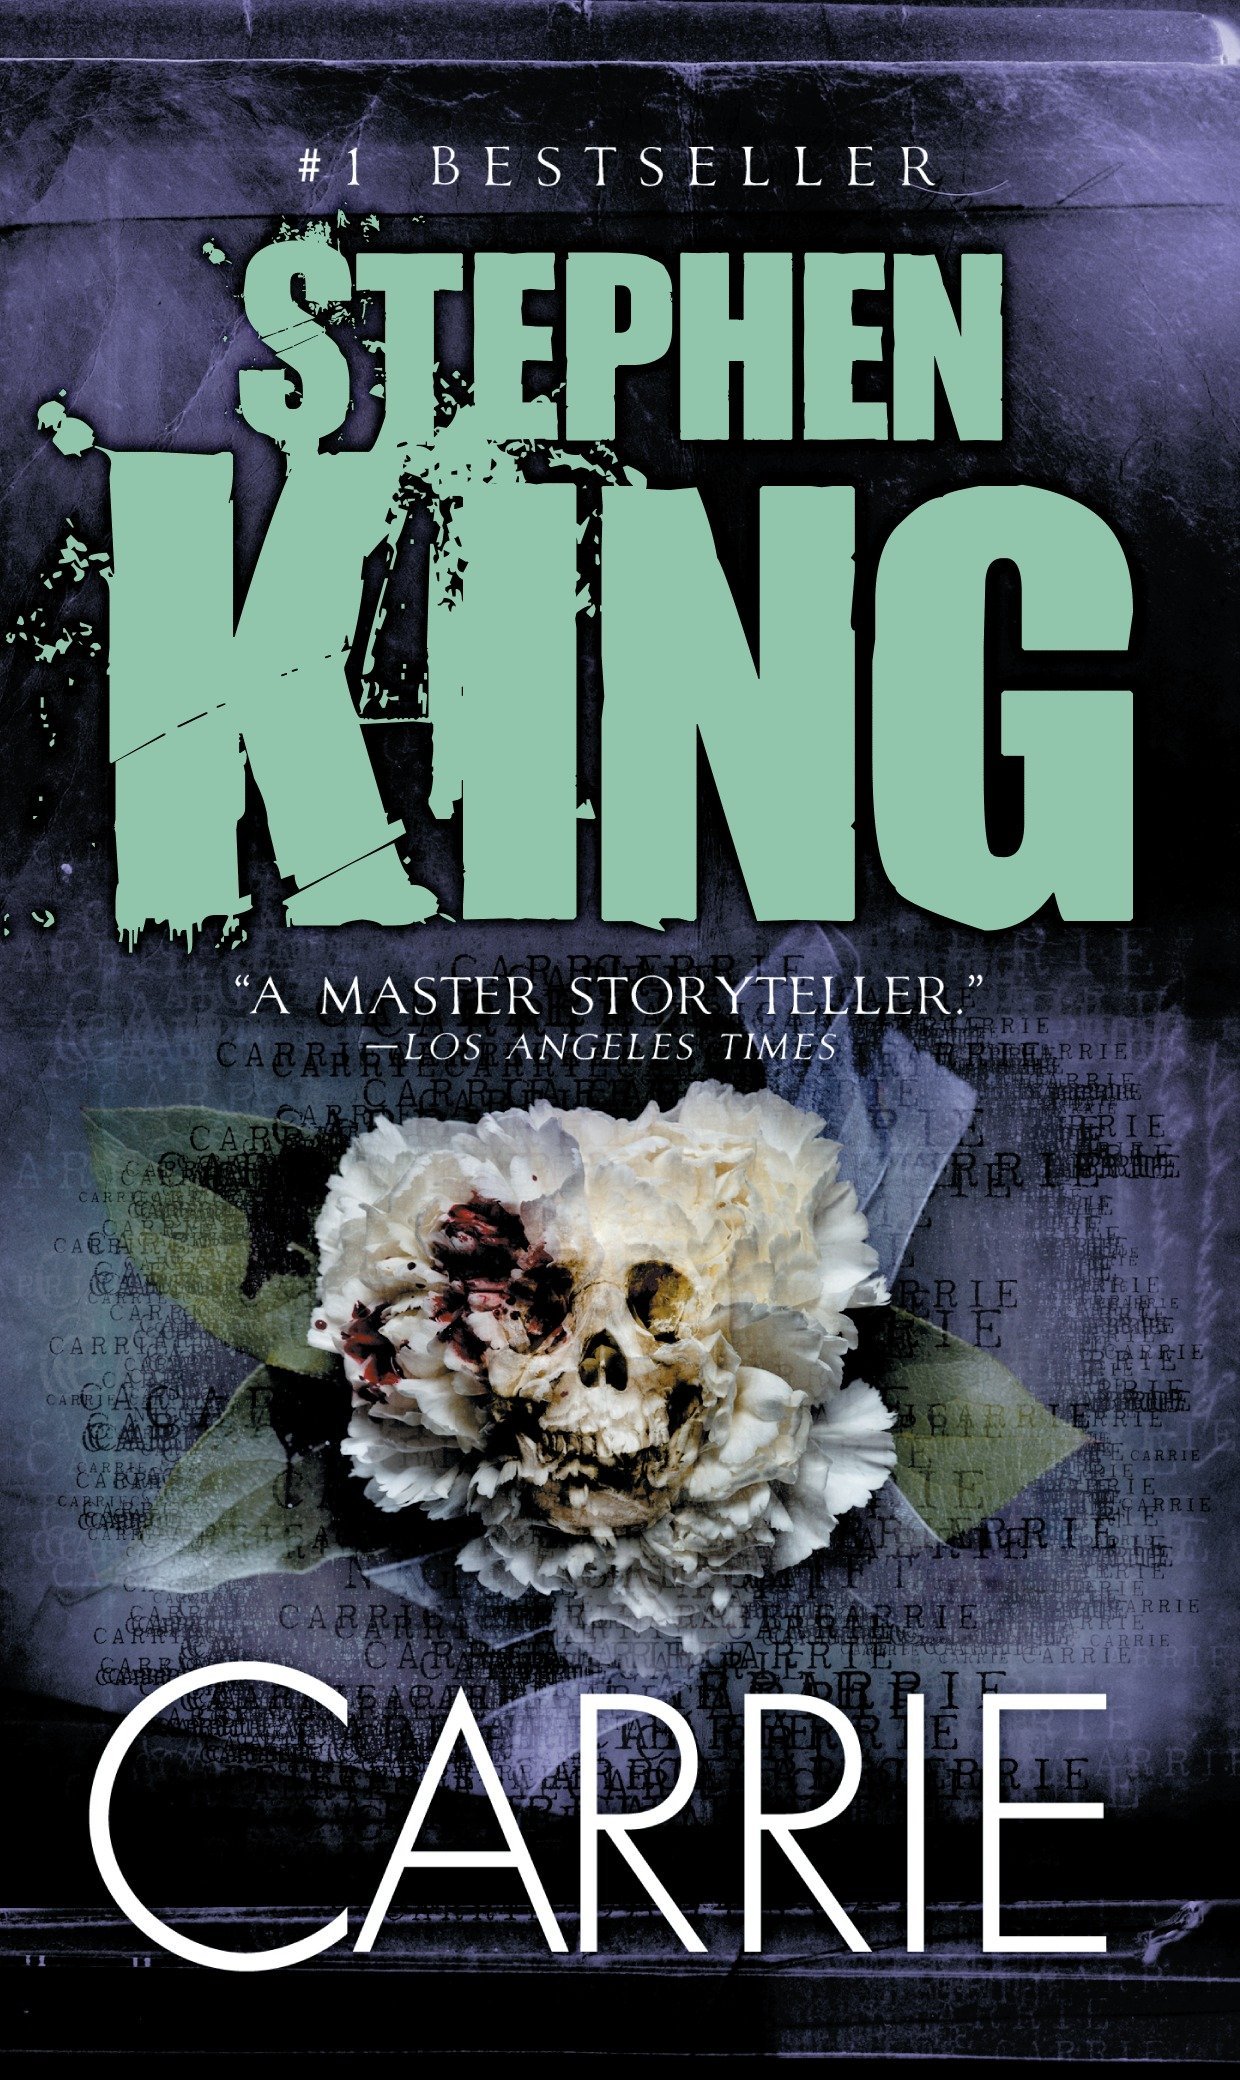 Cover of Carrie by Stephen King